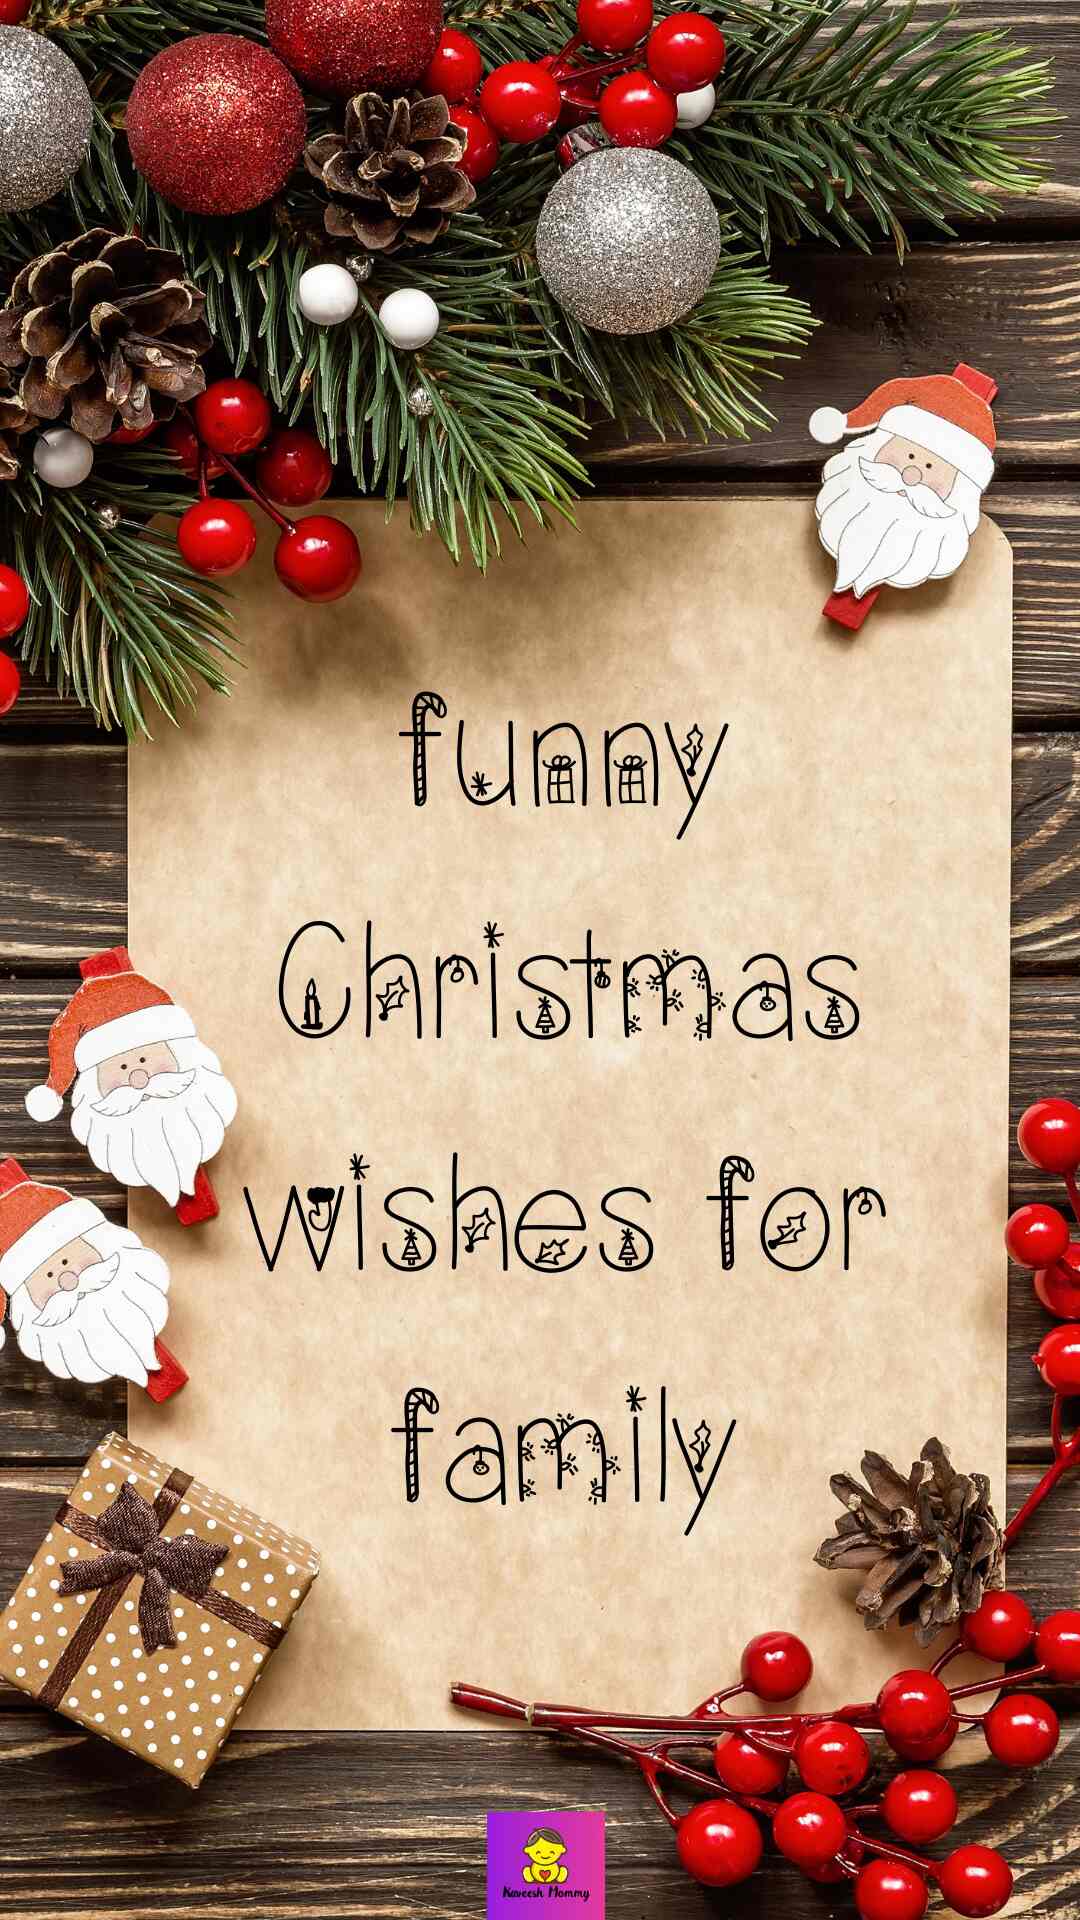 List of "Funny Christmas wishes for family with humor."